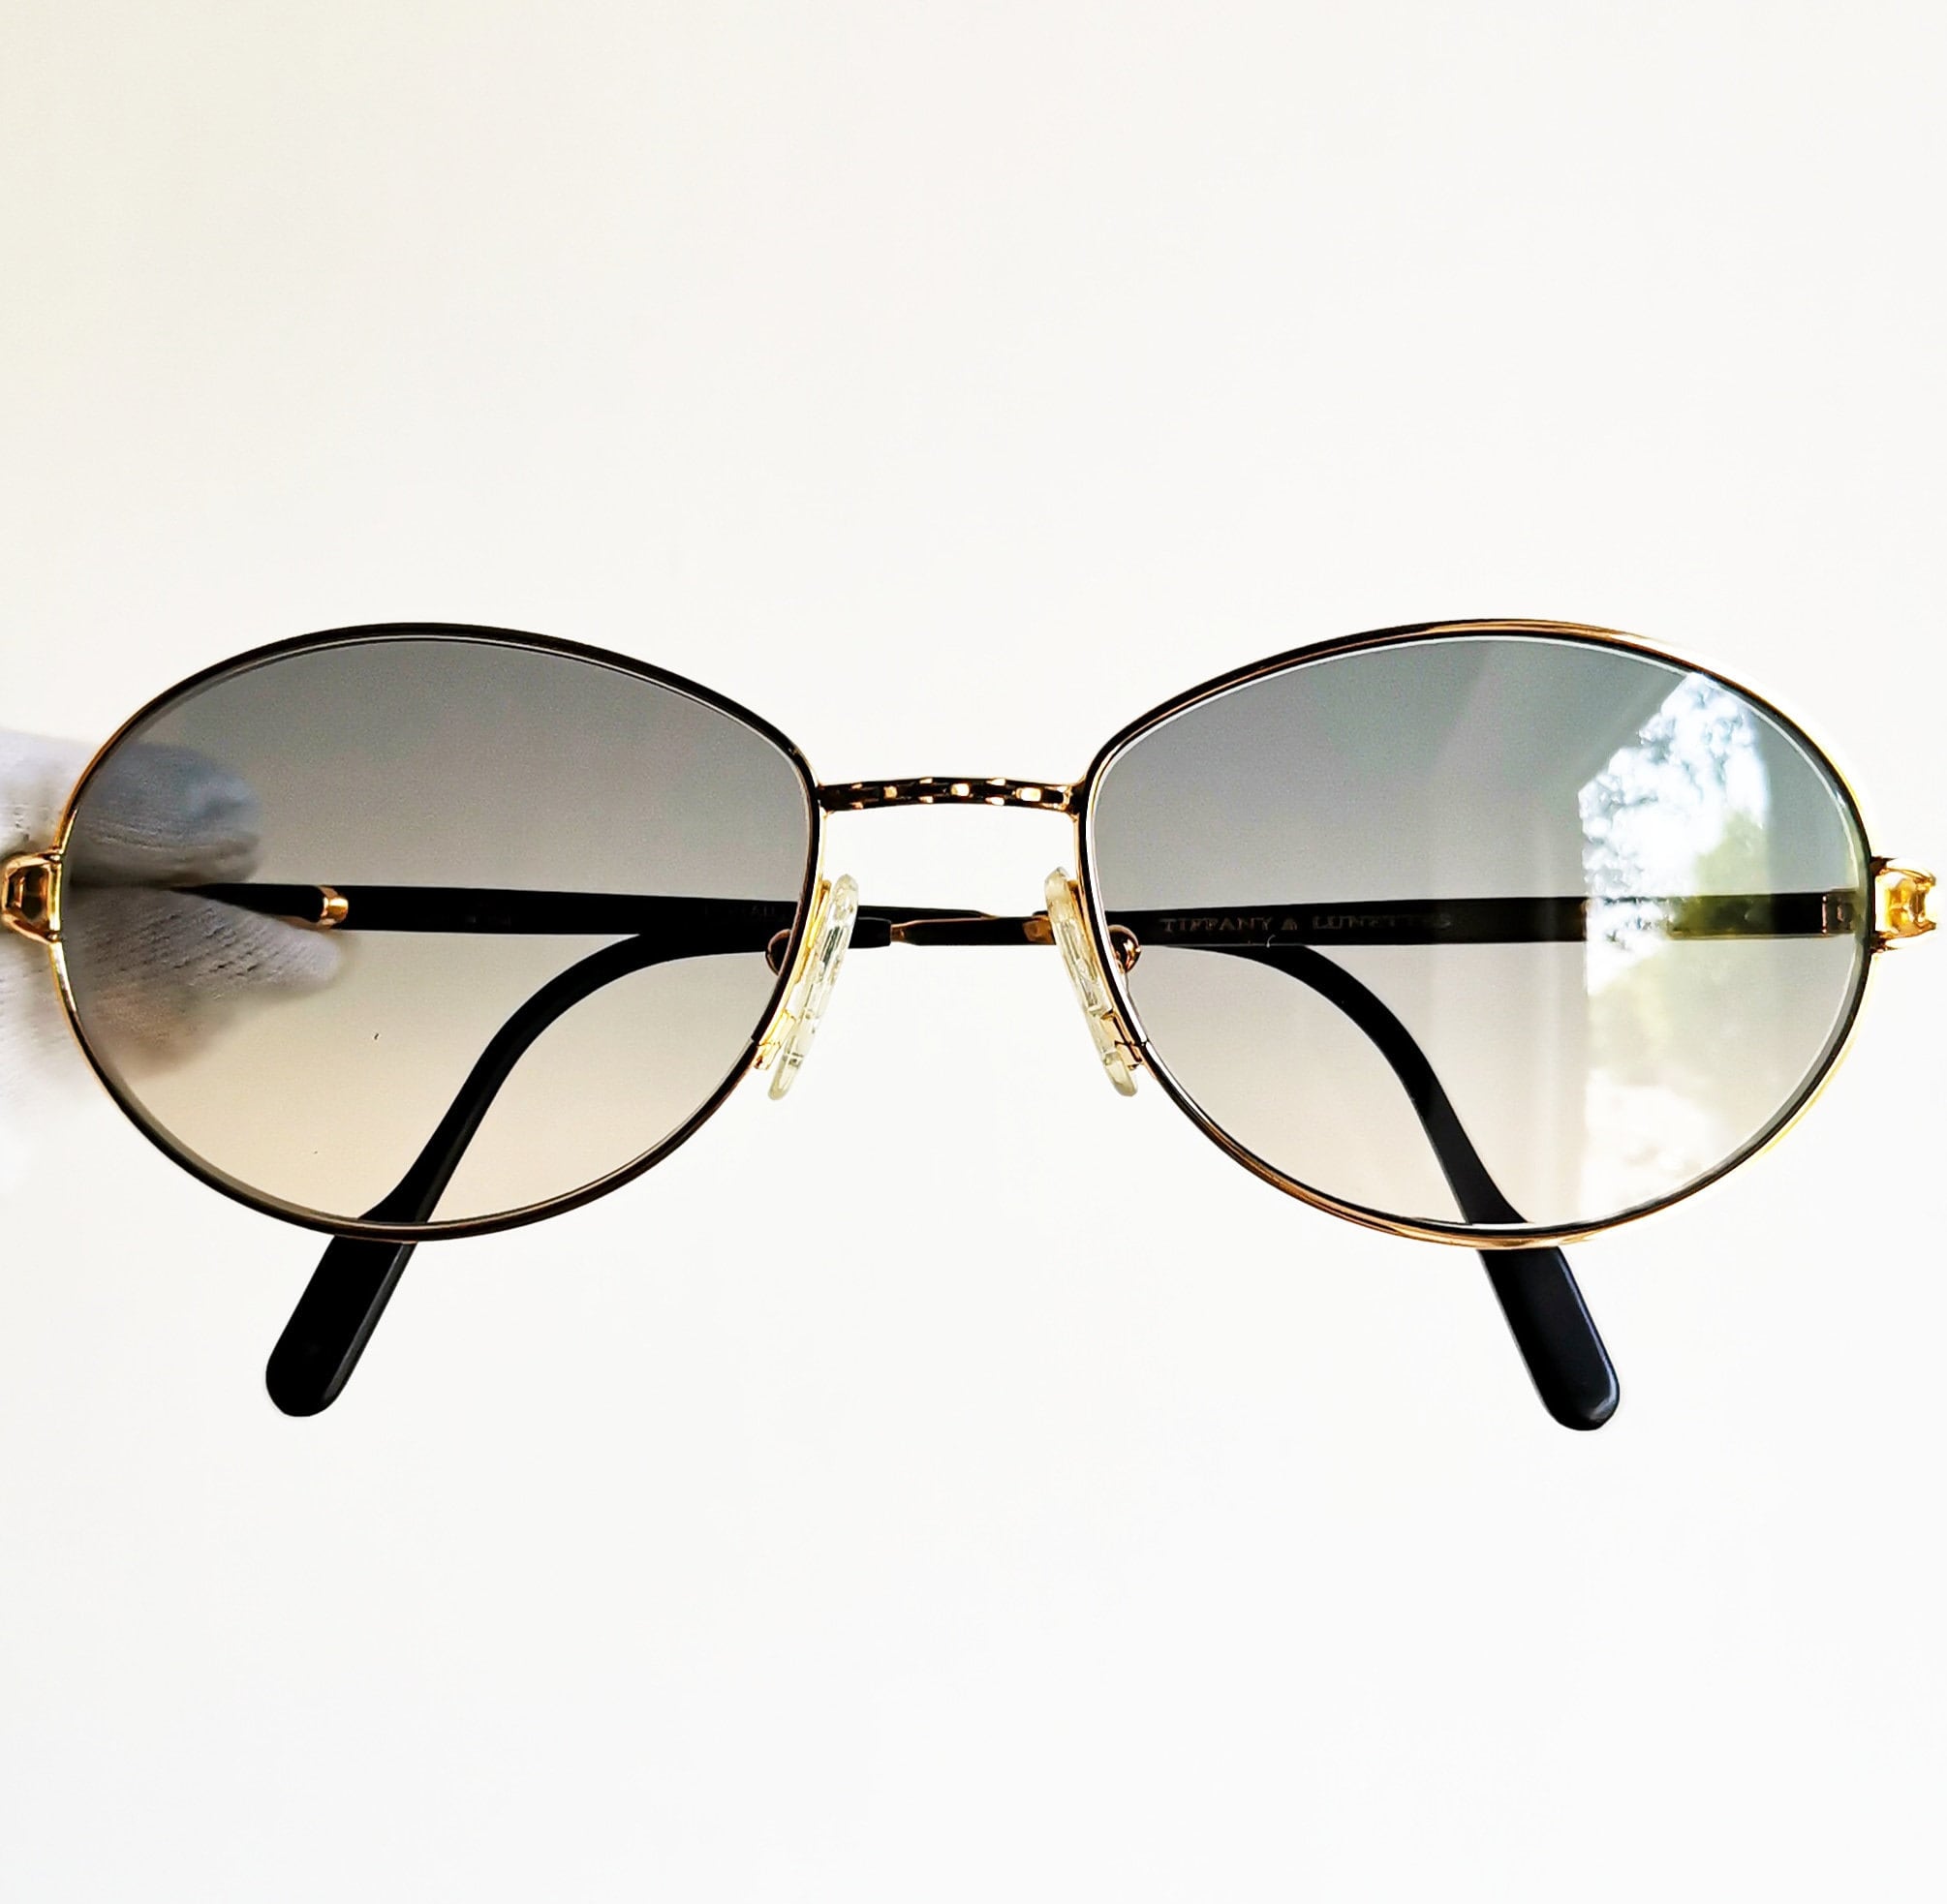 Discover more than 203 tiffany round sunglasses best